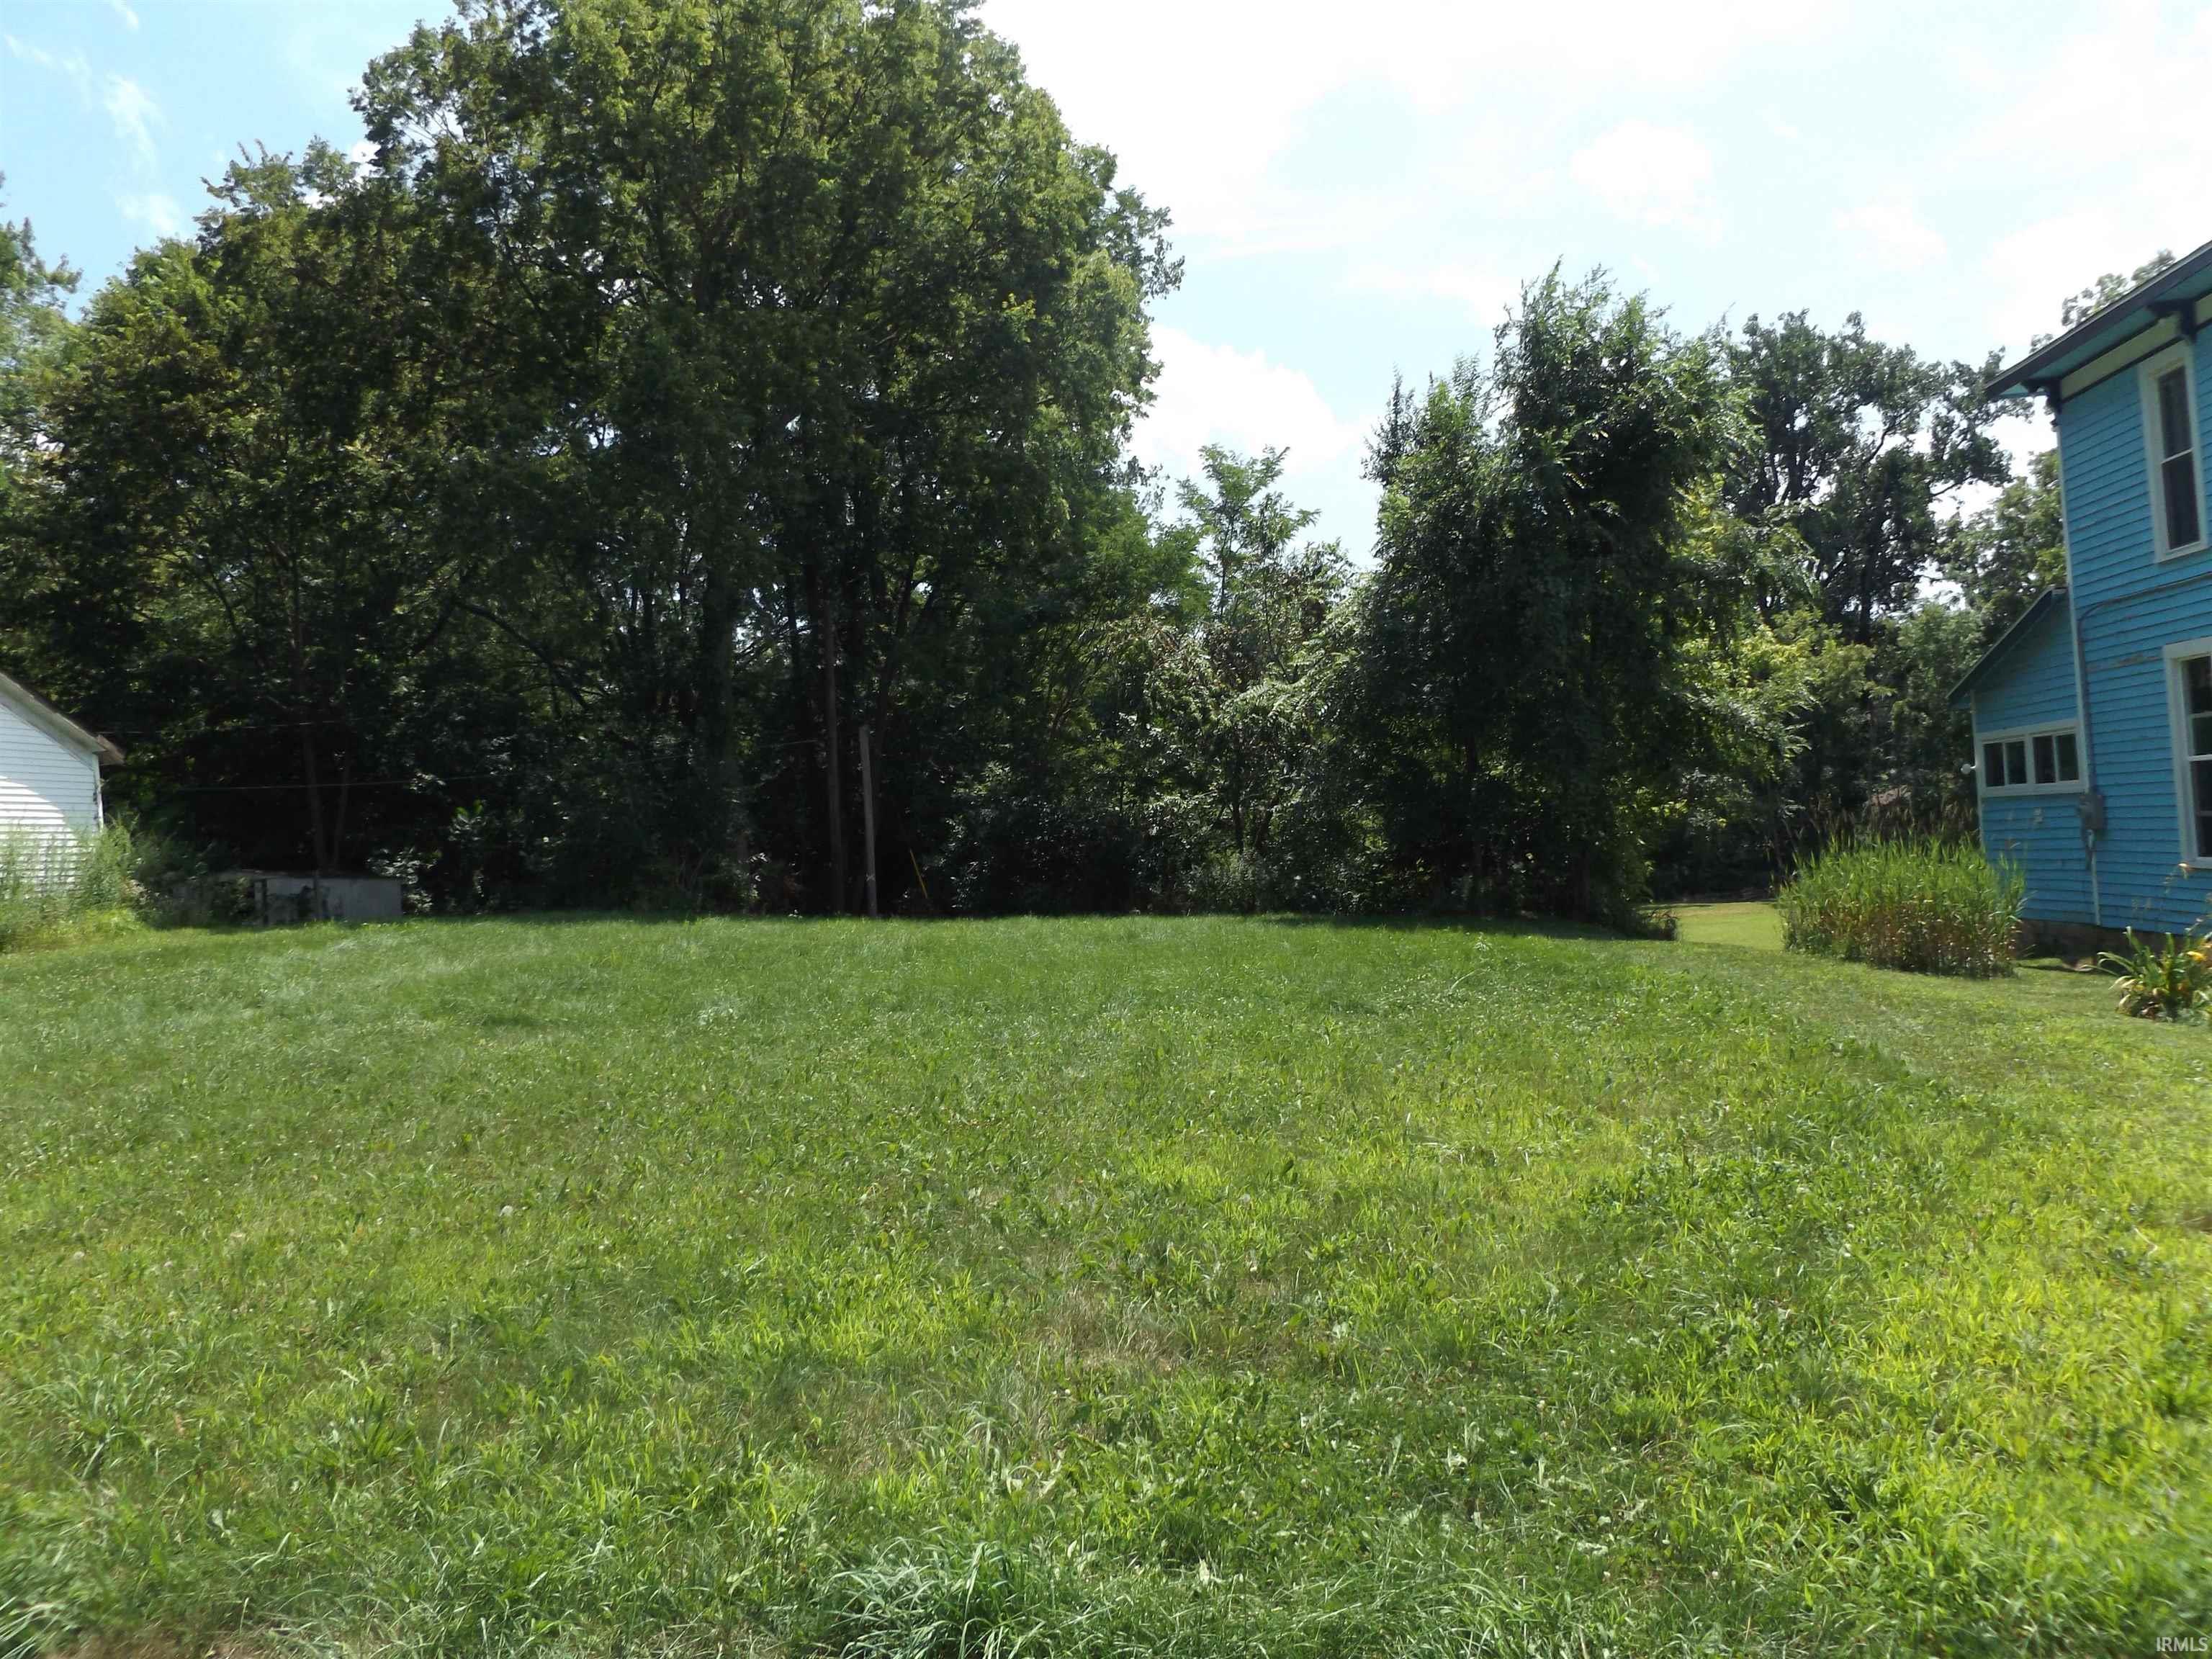 Vacant land on the outskirts of town. Has city utilities available.